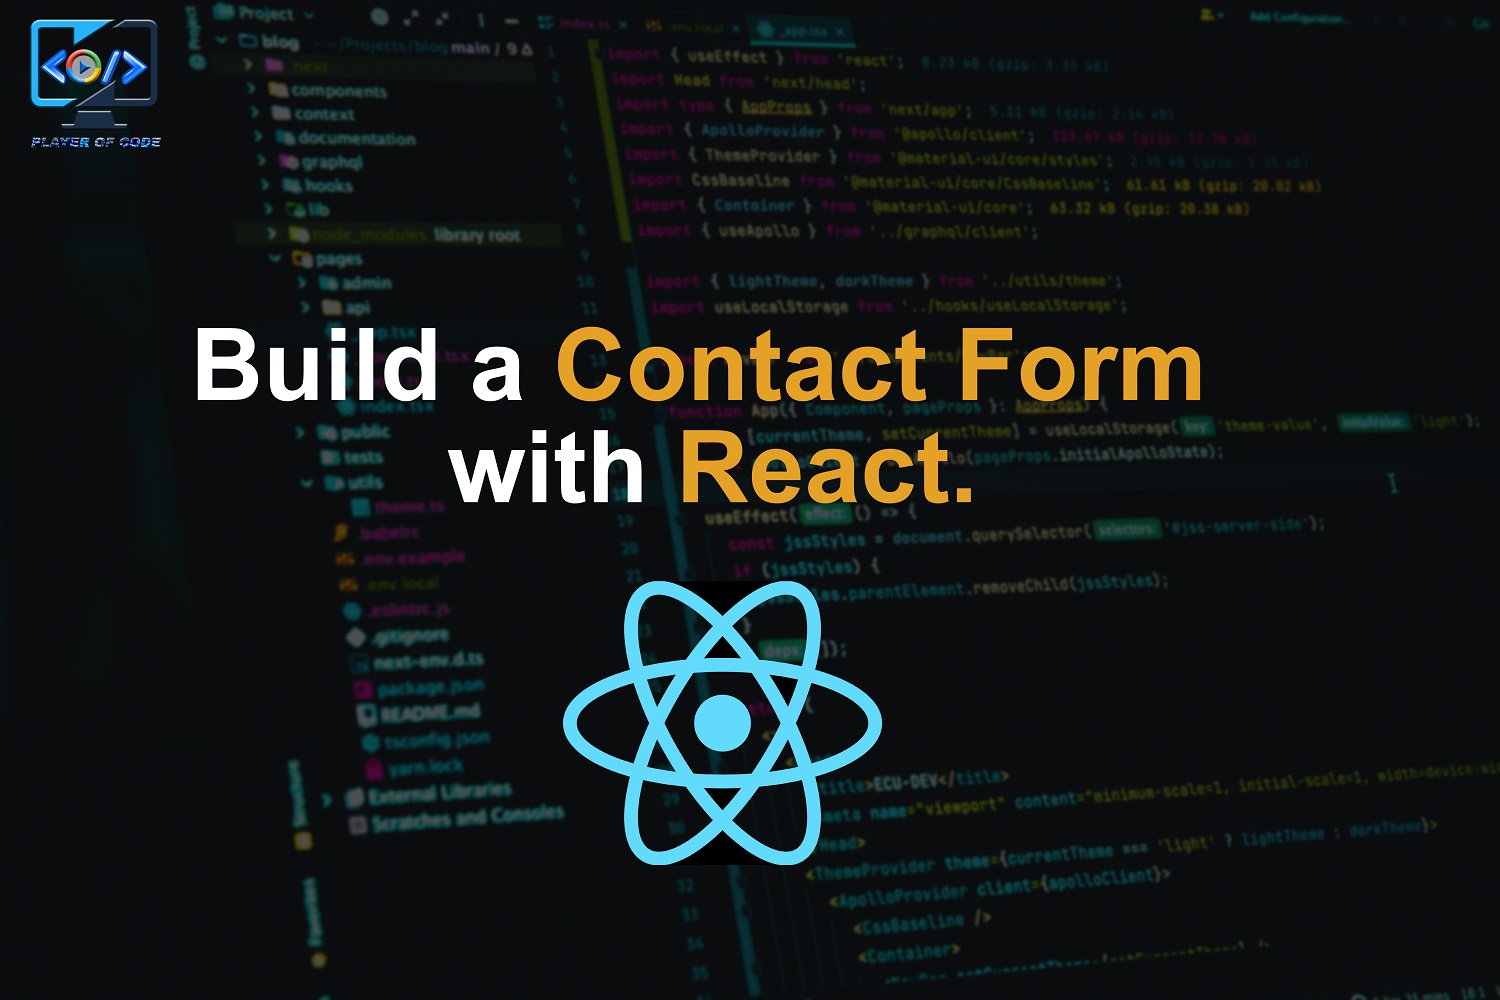 Build a Contact Form with React